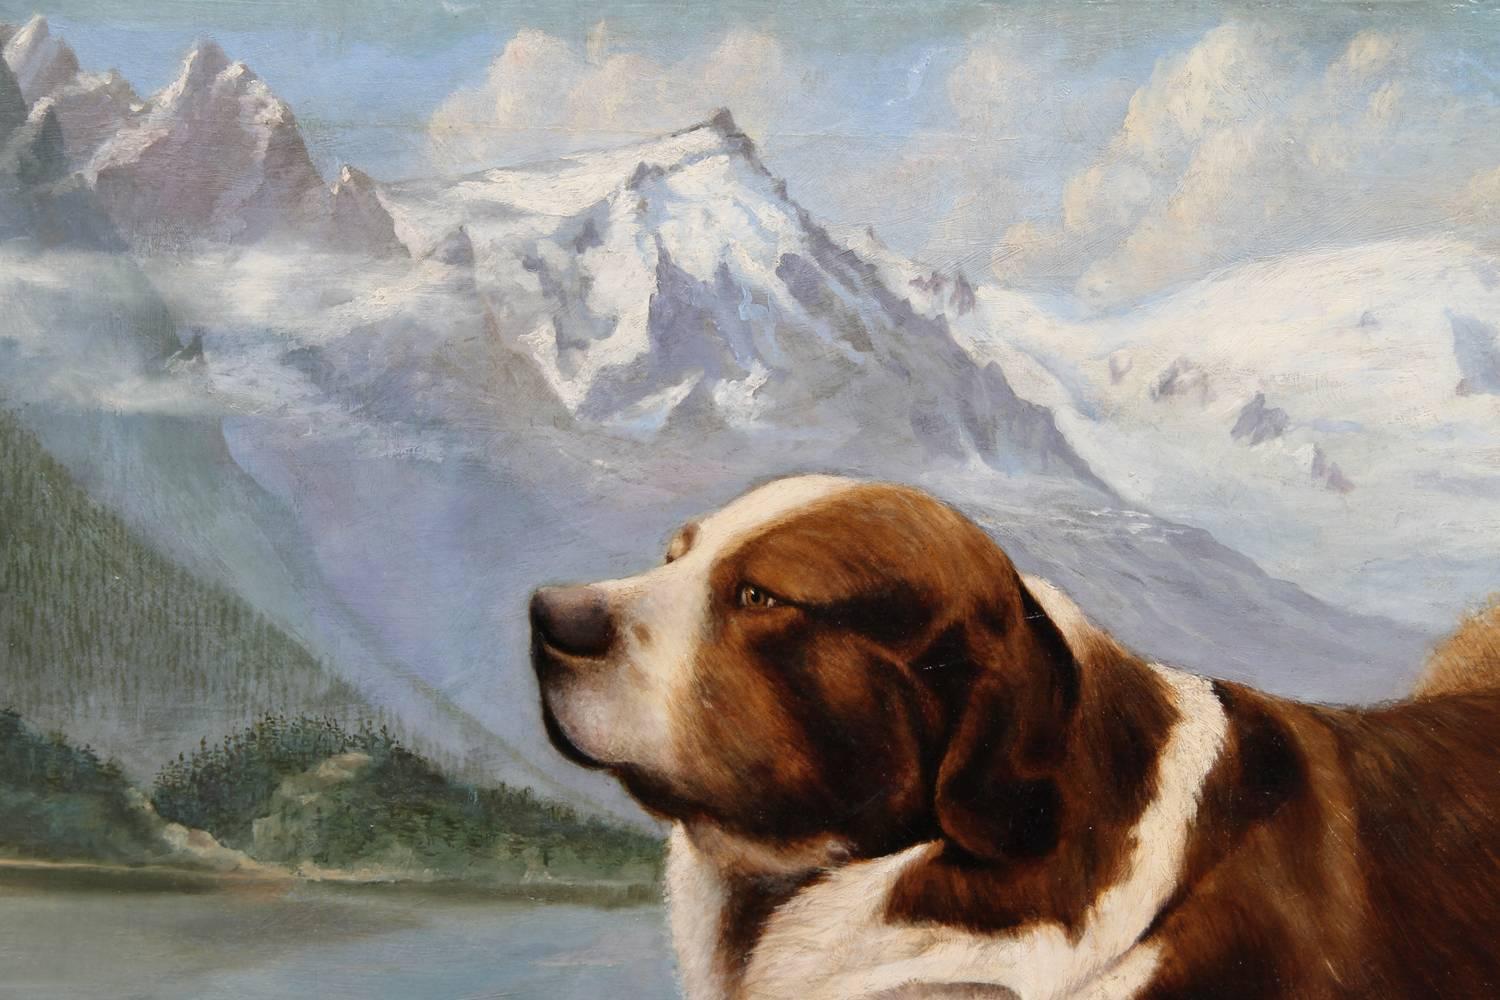 Artist: J. Bowker
Title: St. Bernard
Year: 1887
Medium: Oil on Canvas, signed and dated l.r.
Size: 30 in. x 48 in. (76.2 cm x 121.92 cm)